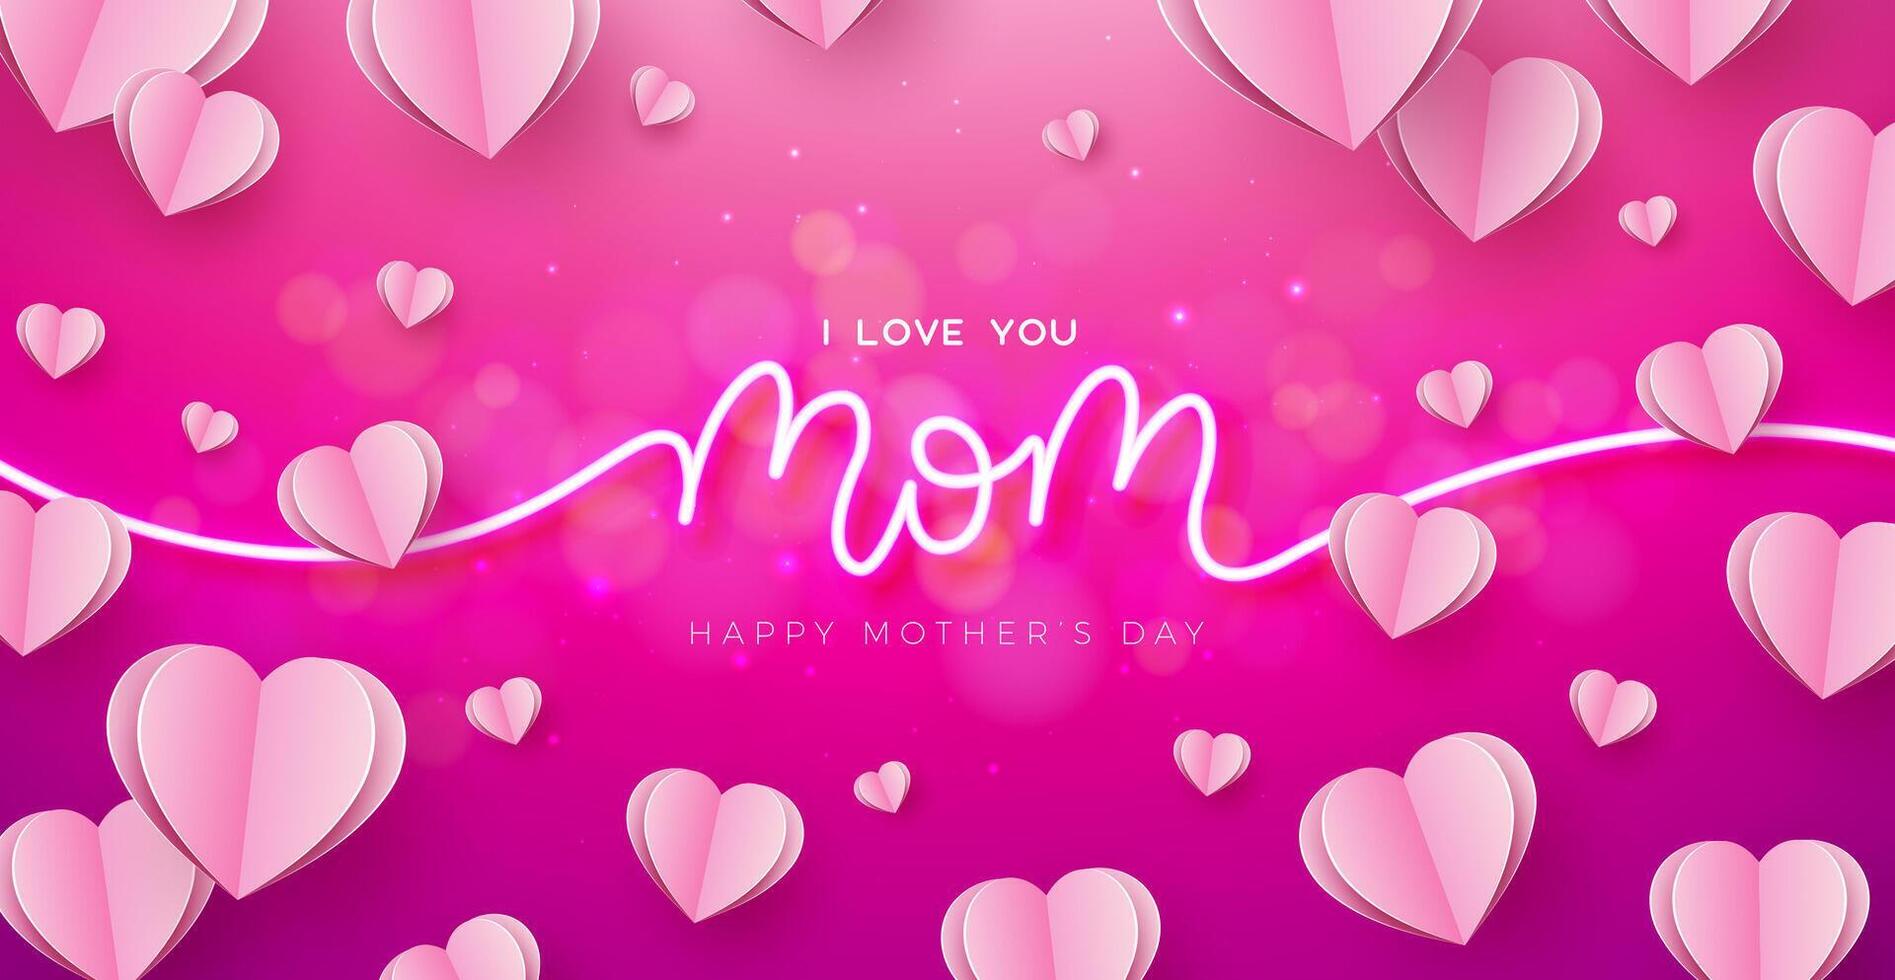 Happy Mother's Day Greeting Card Design with Paper Heart and Glowing Neon Light I Love You Mom Typography Lettering on Pink Background. Mother Day Illustration for Postcard, Banner, Flyer vector